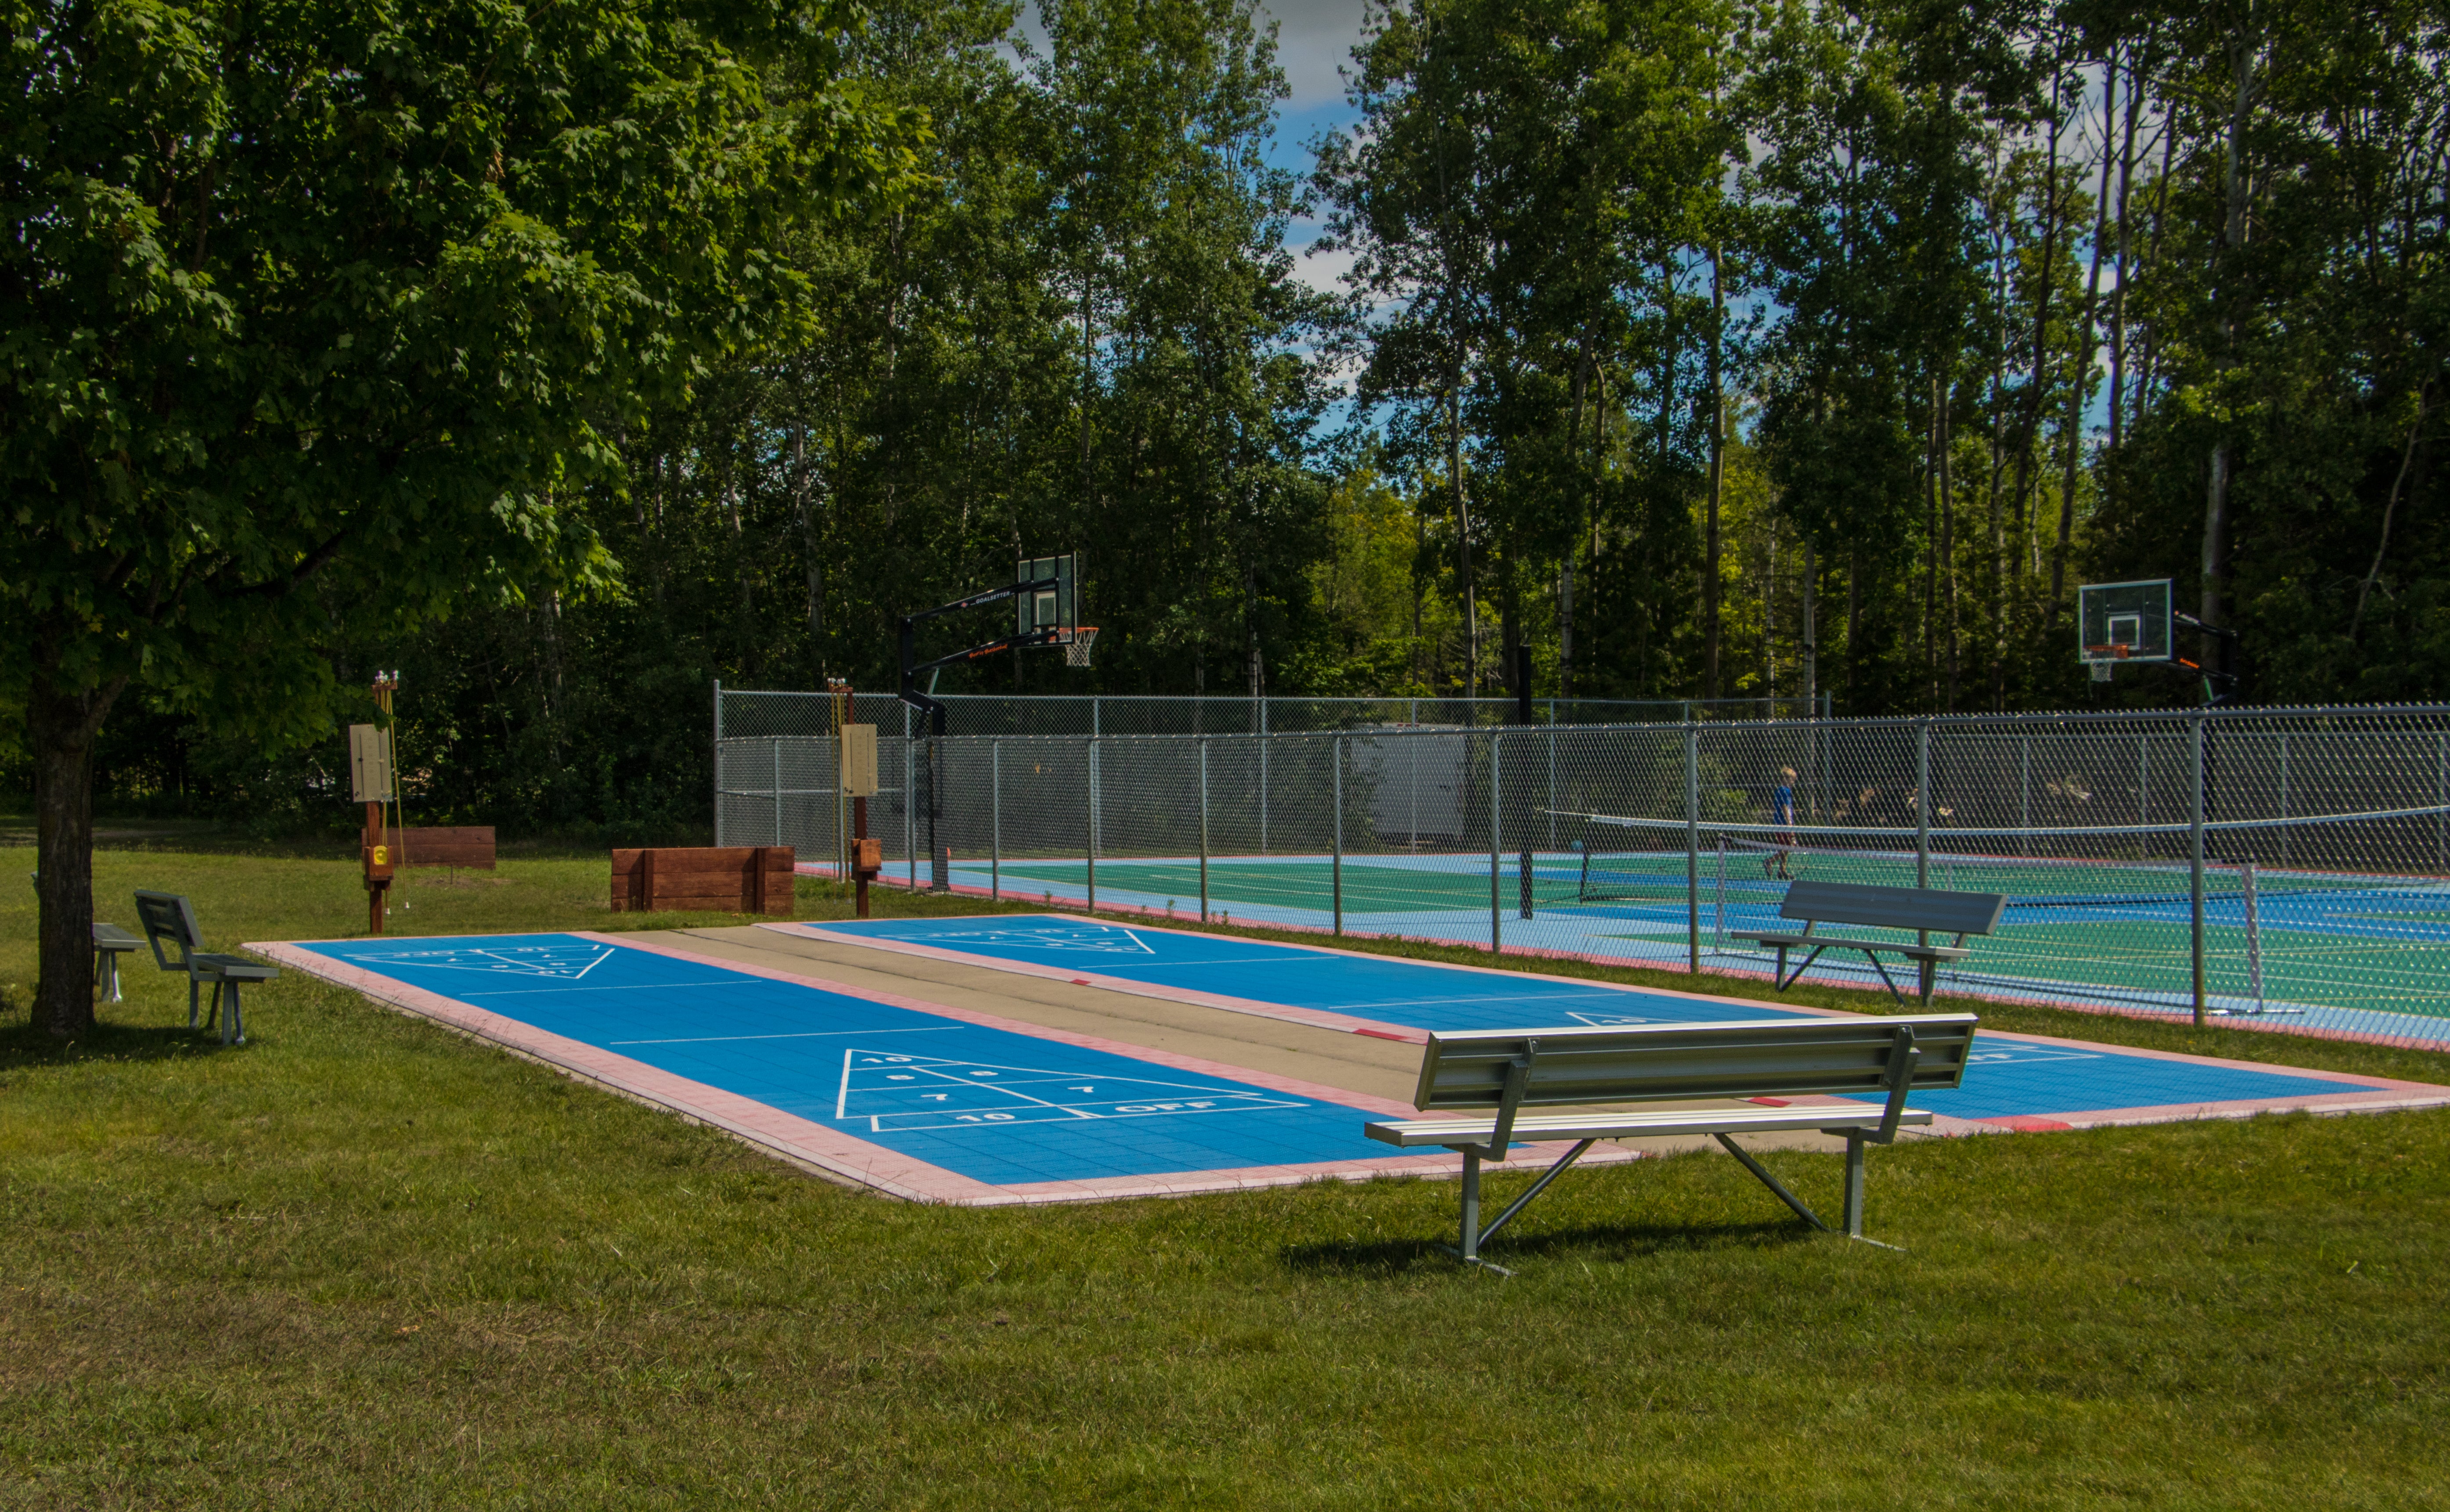 Tennis anyone?  Or, volleyball, basketball, shuffle board, or horseshoes?  All of these activities are located behind the campground office.